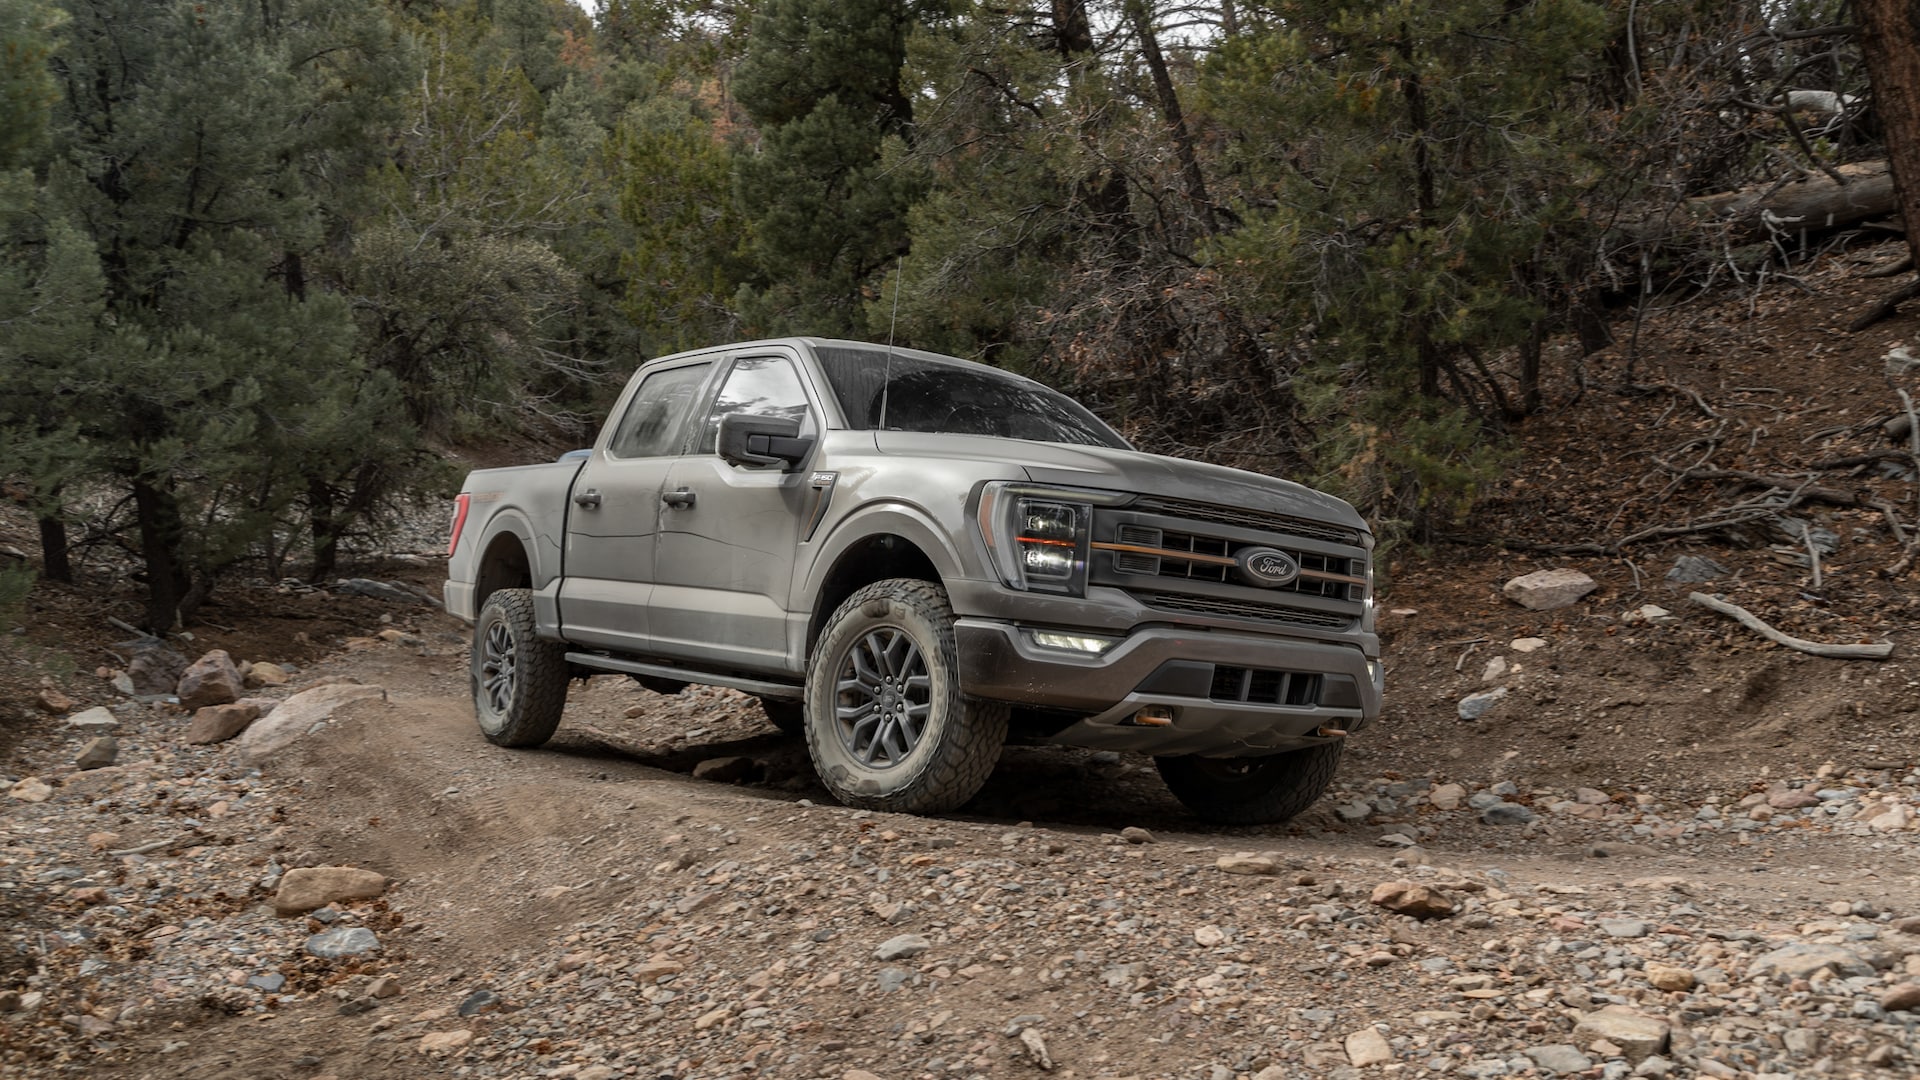 2021 Ford F-150 Tremor: Four Wheeler Pickup Truck of the Year Contender